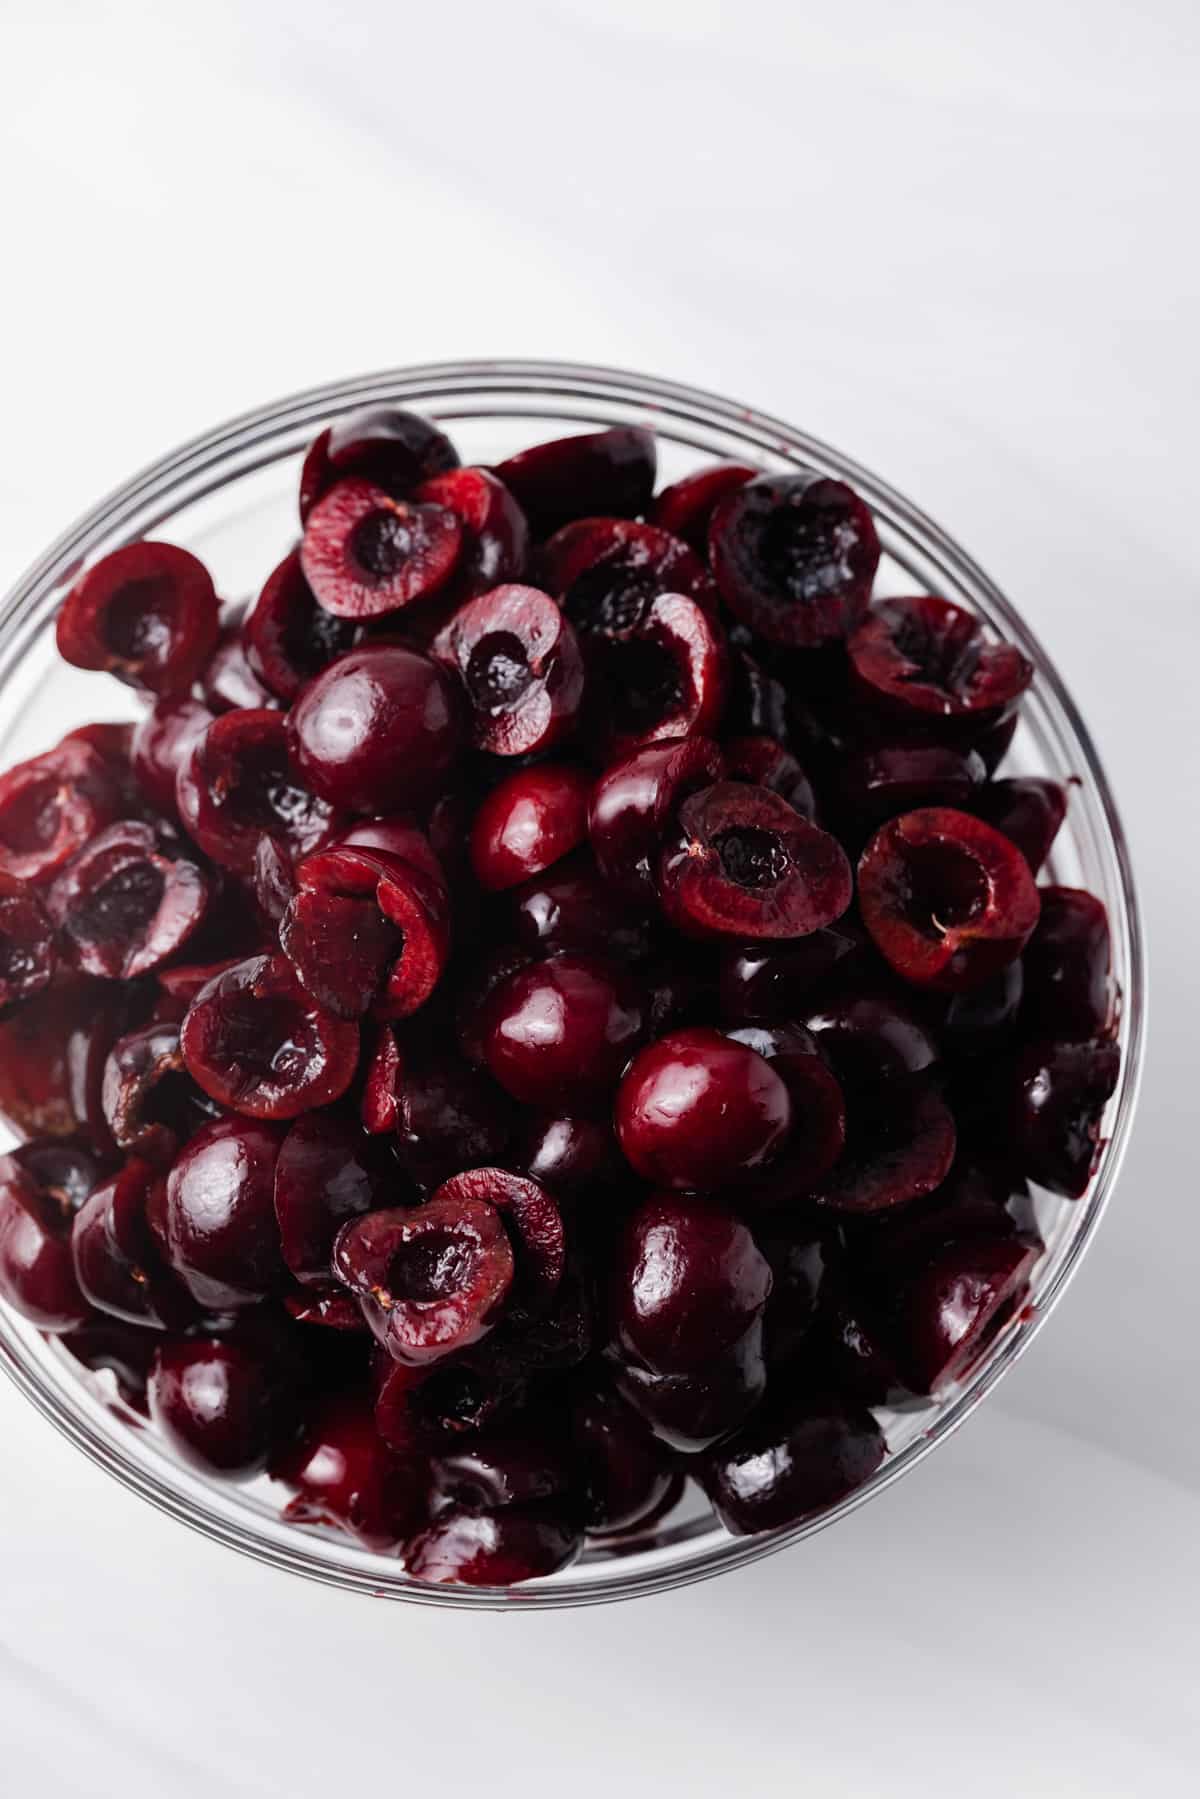 Pitted and halved dark red cherries in a glass bowl